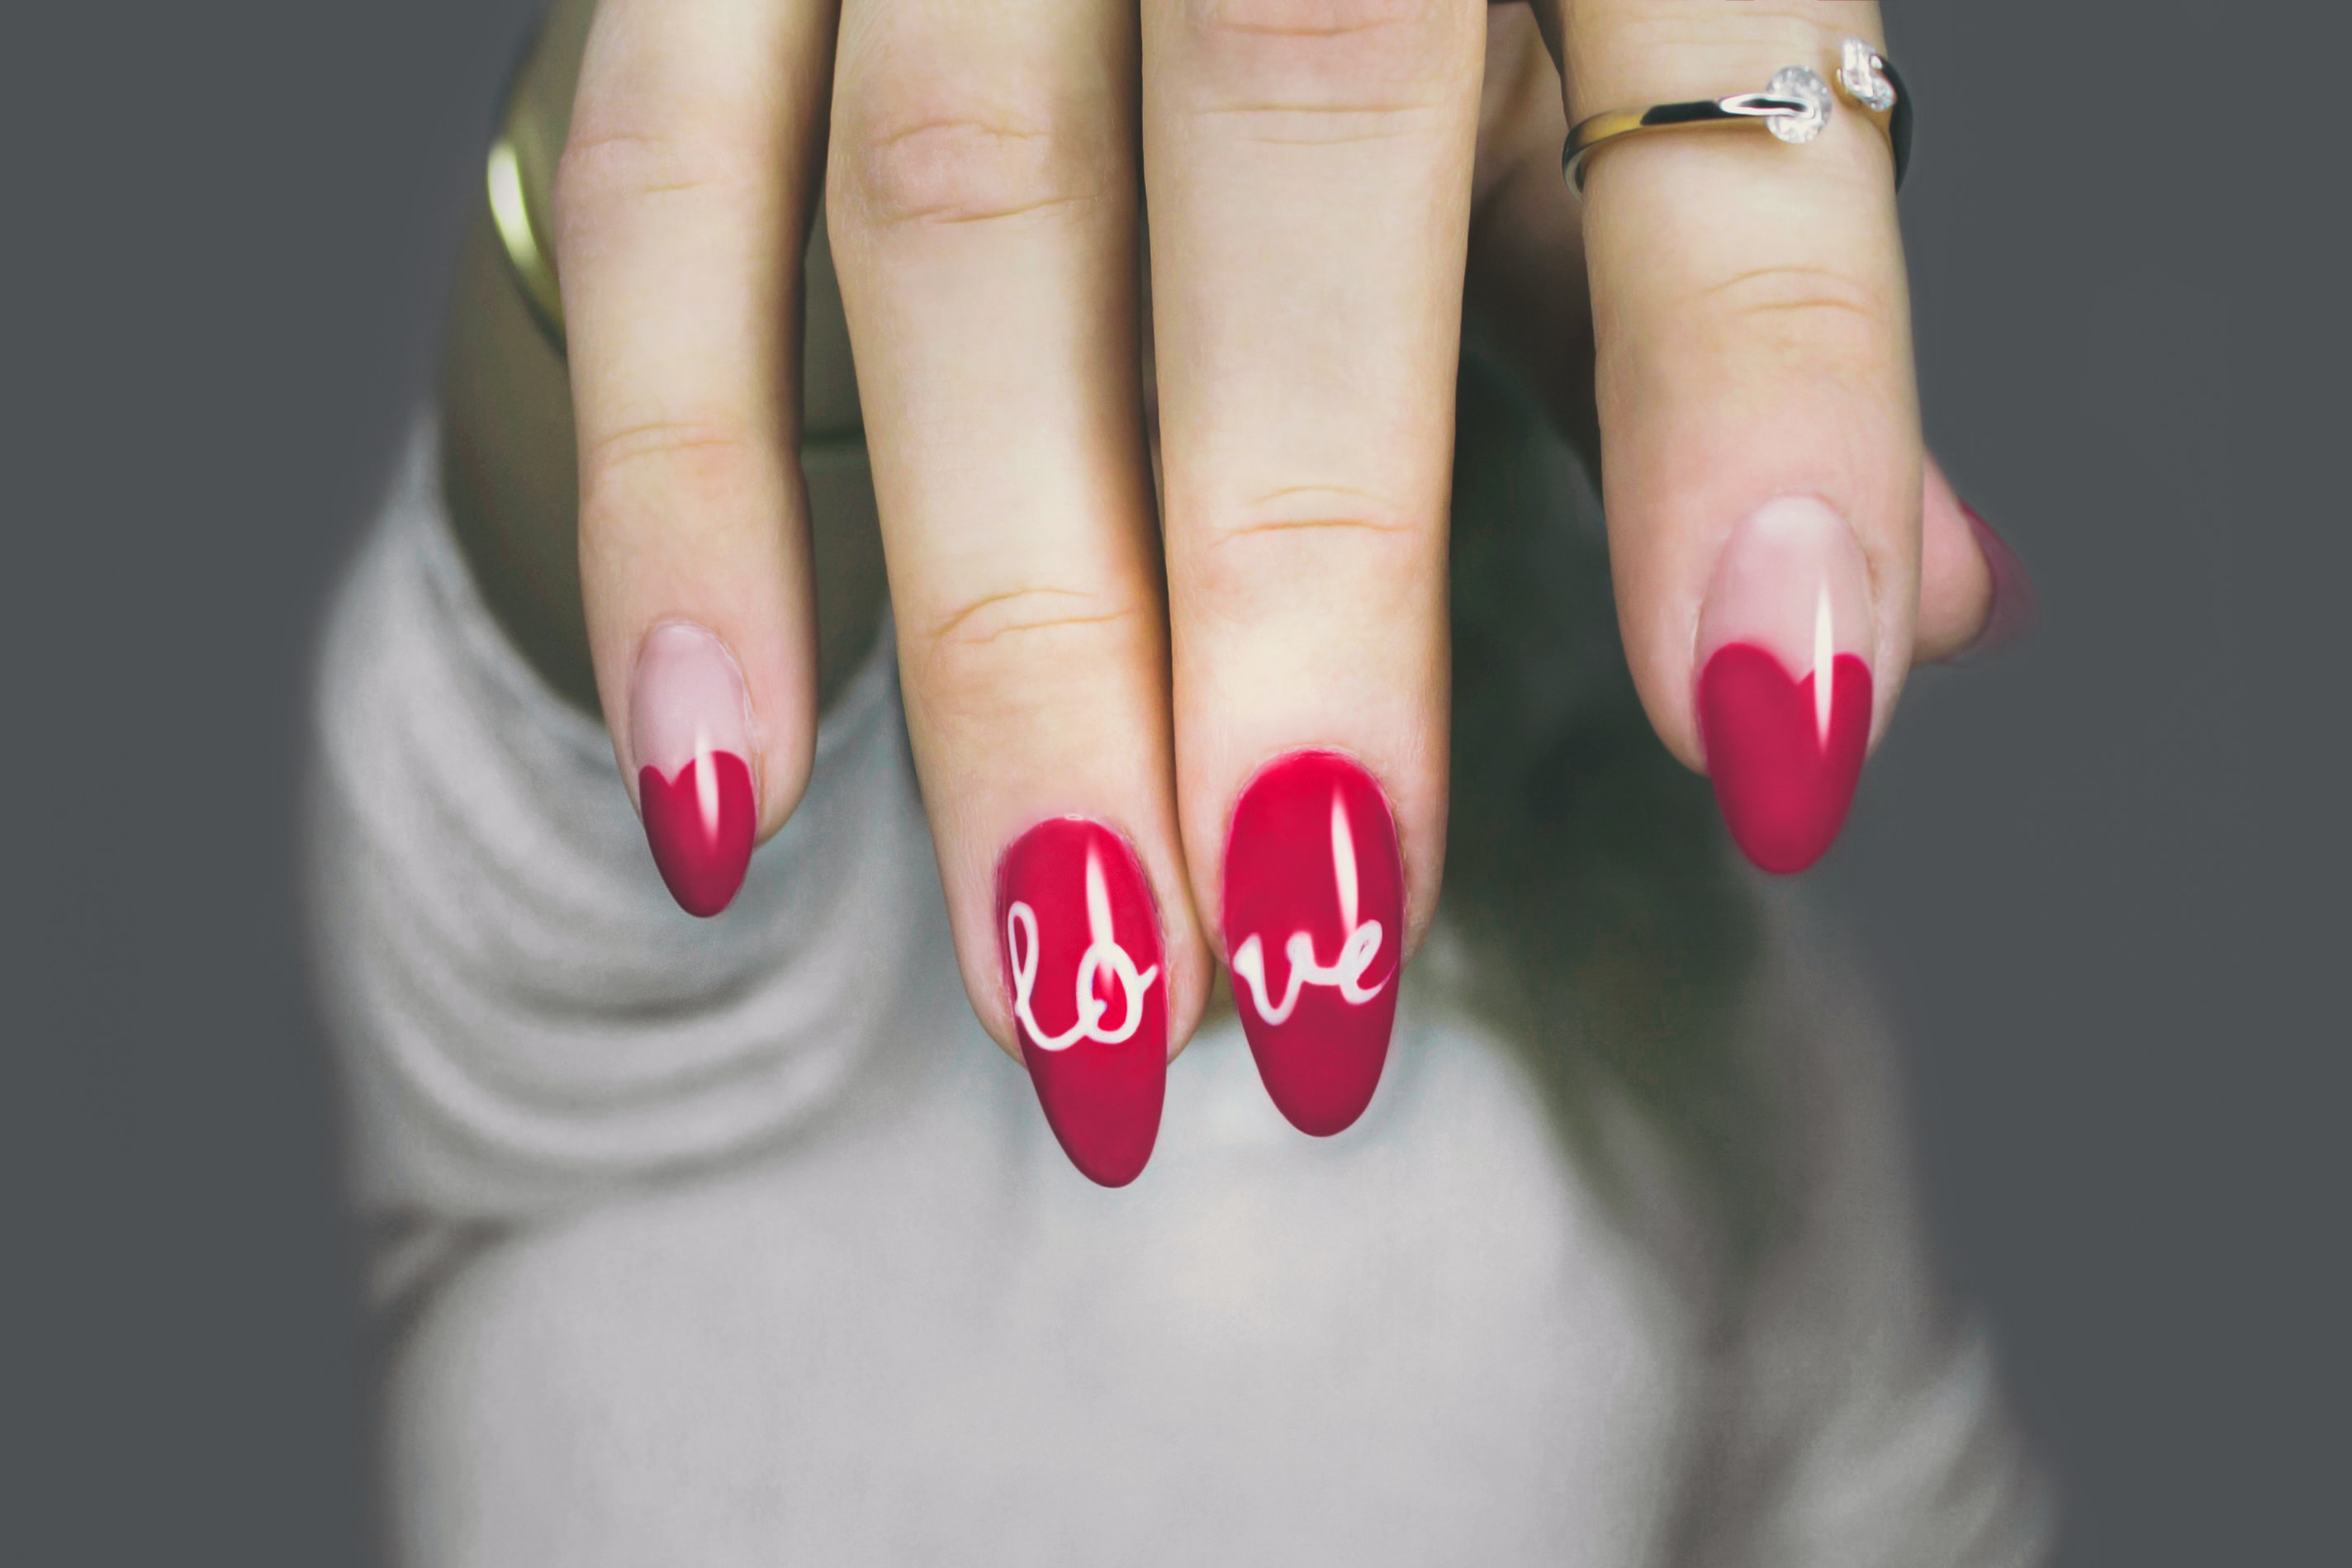 A woman holds her hand up to the camera, showing off red nails with "love" written on them.